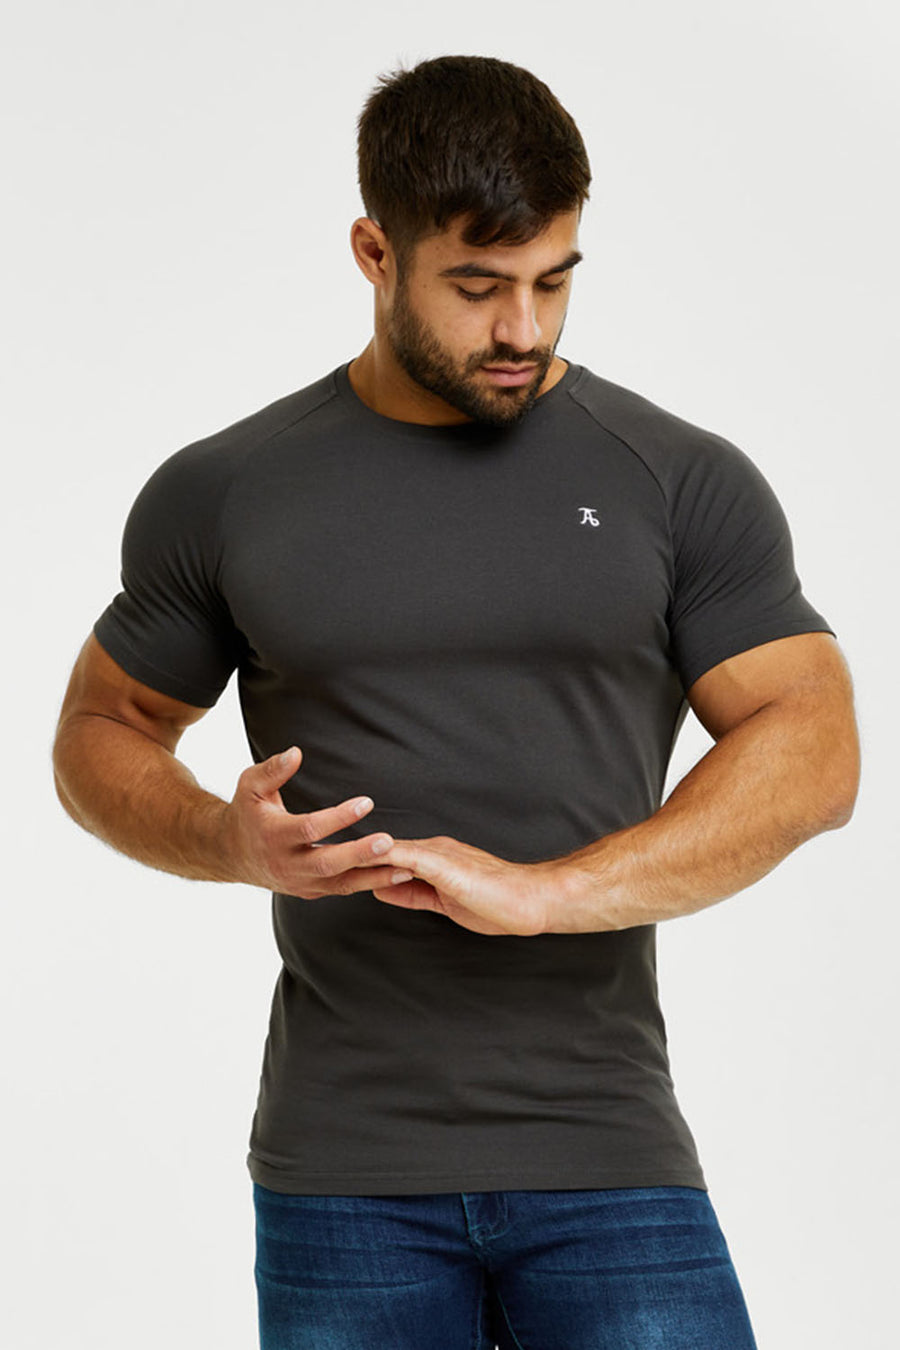 Athletic Fit T-Shirts - Tailored Athlete - TAILORED ATHLETE